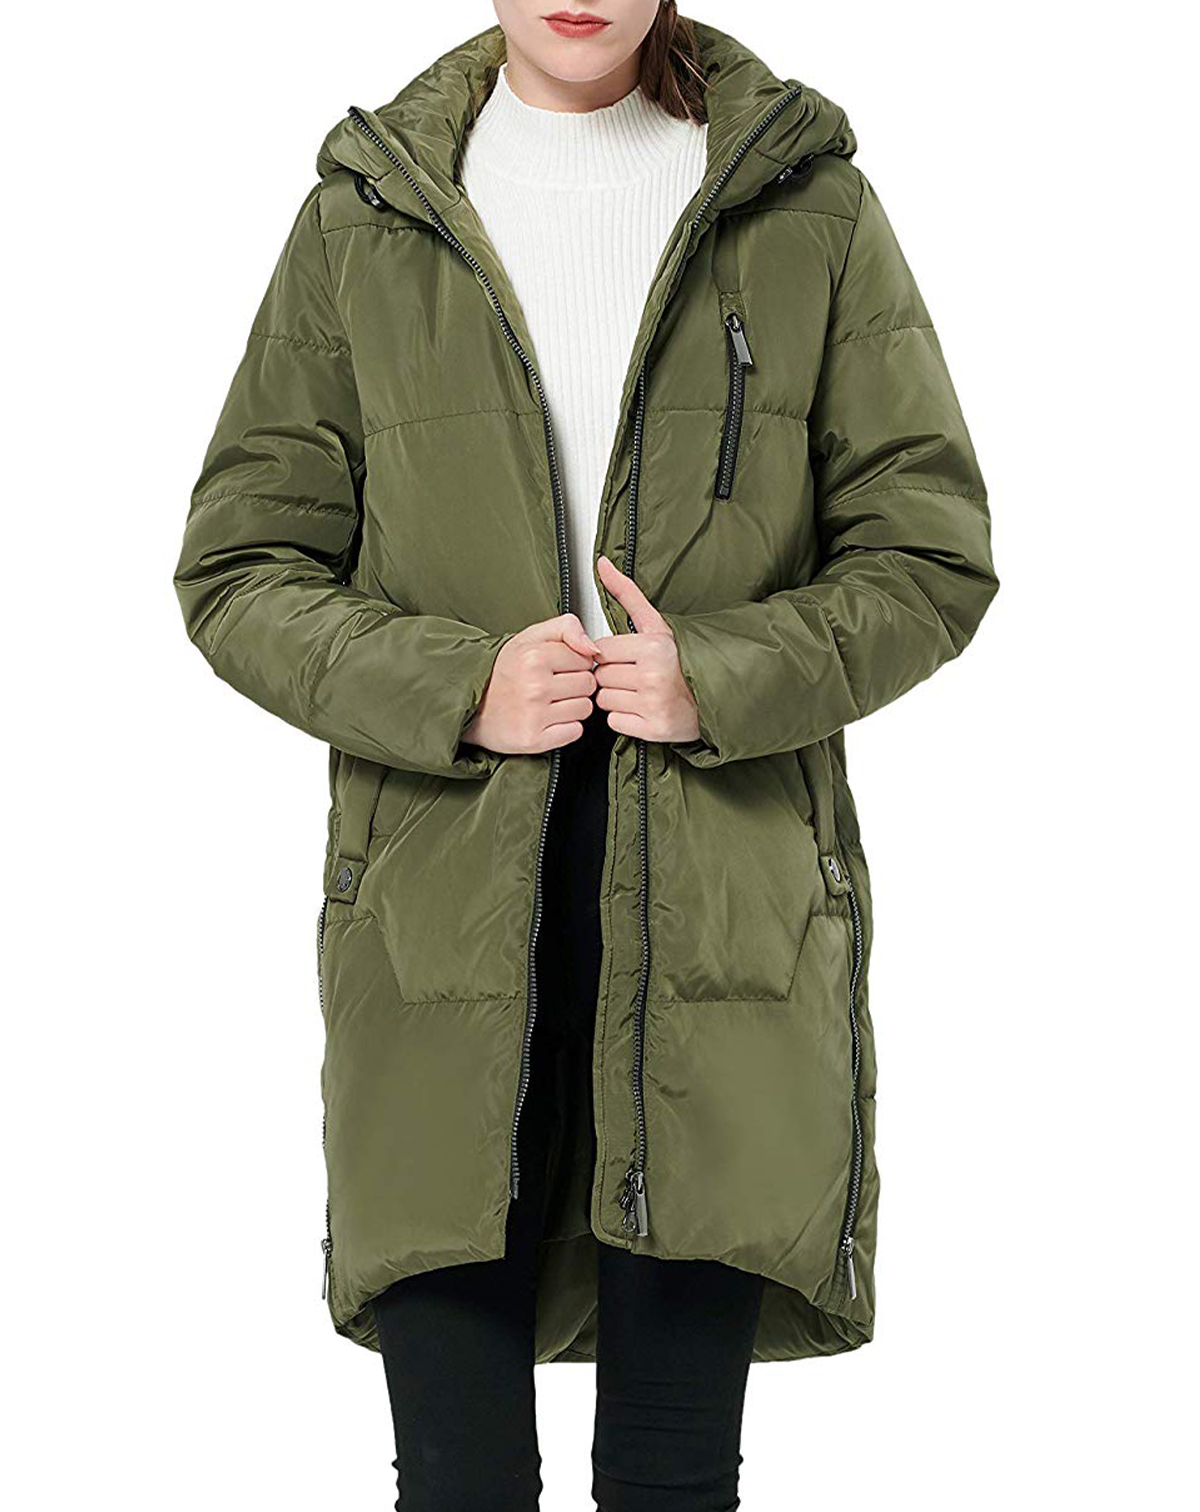 ADOMI Womens Long Hooded Thickened Down Coat with Fur Trim